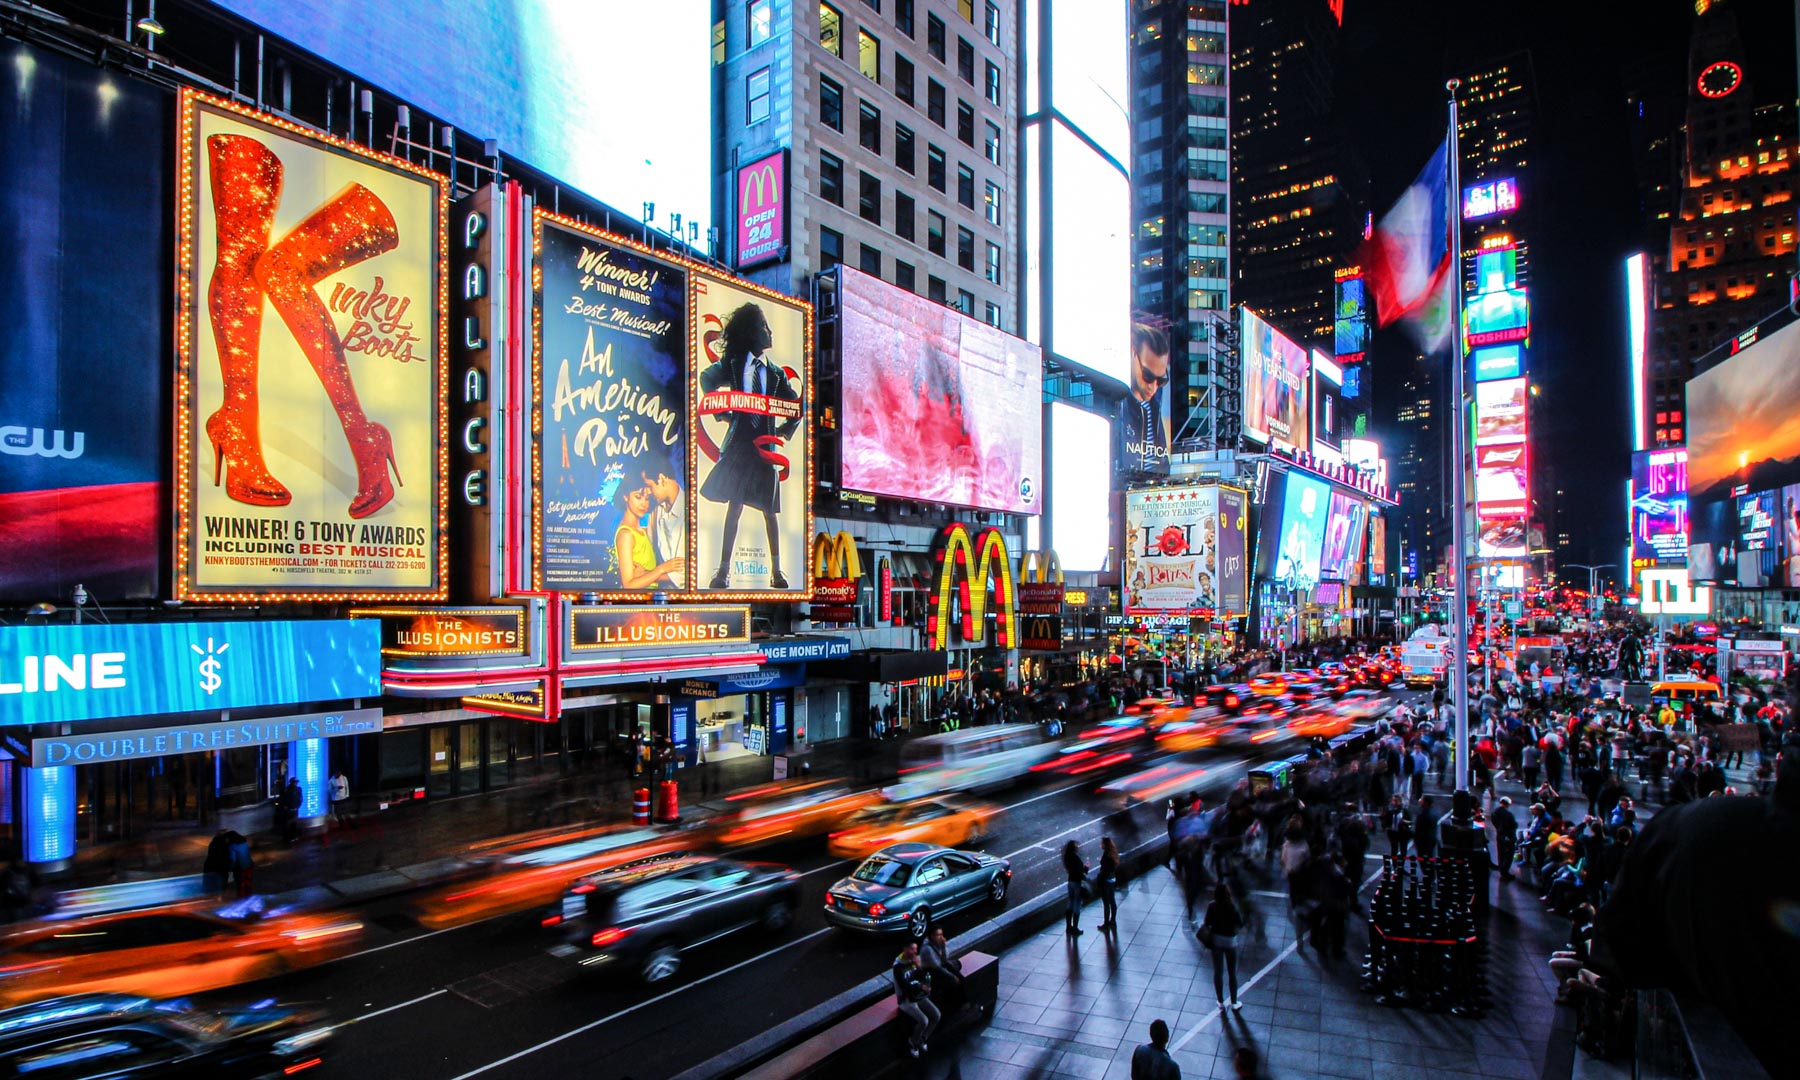 The 12 Best Near Times Square (New York City) – Wandering